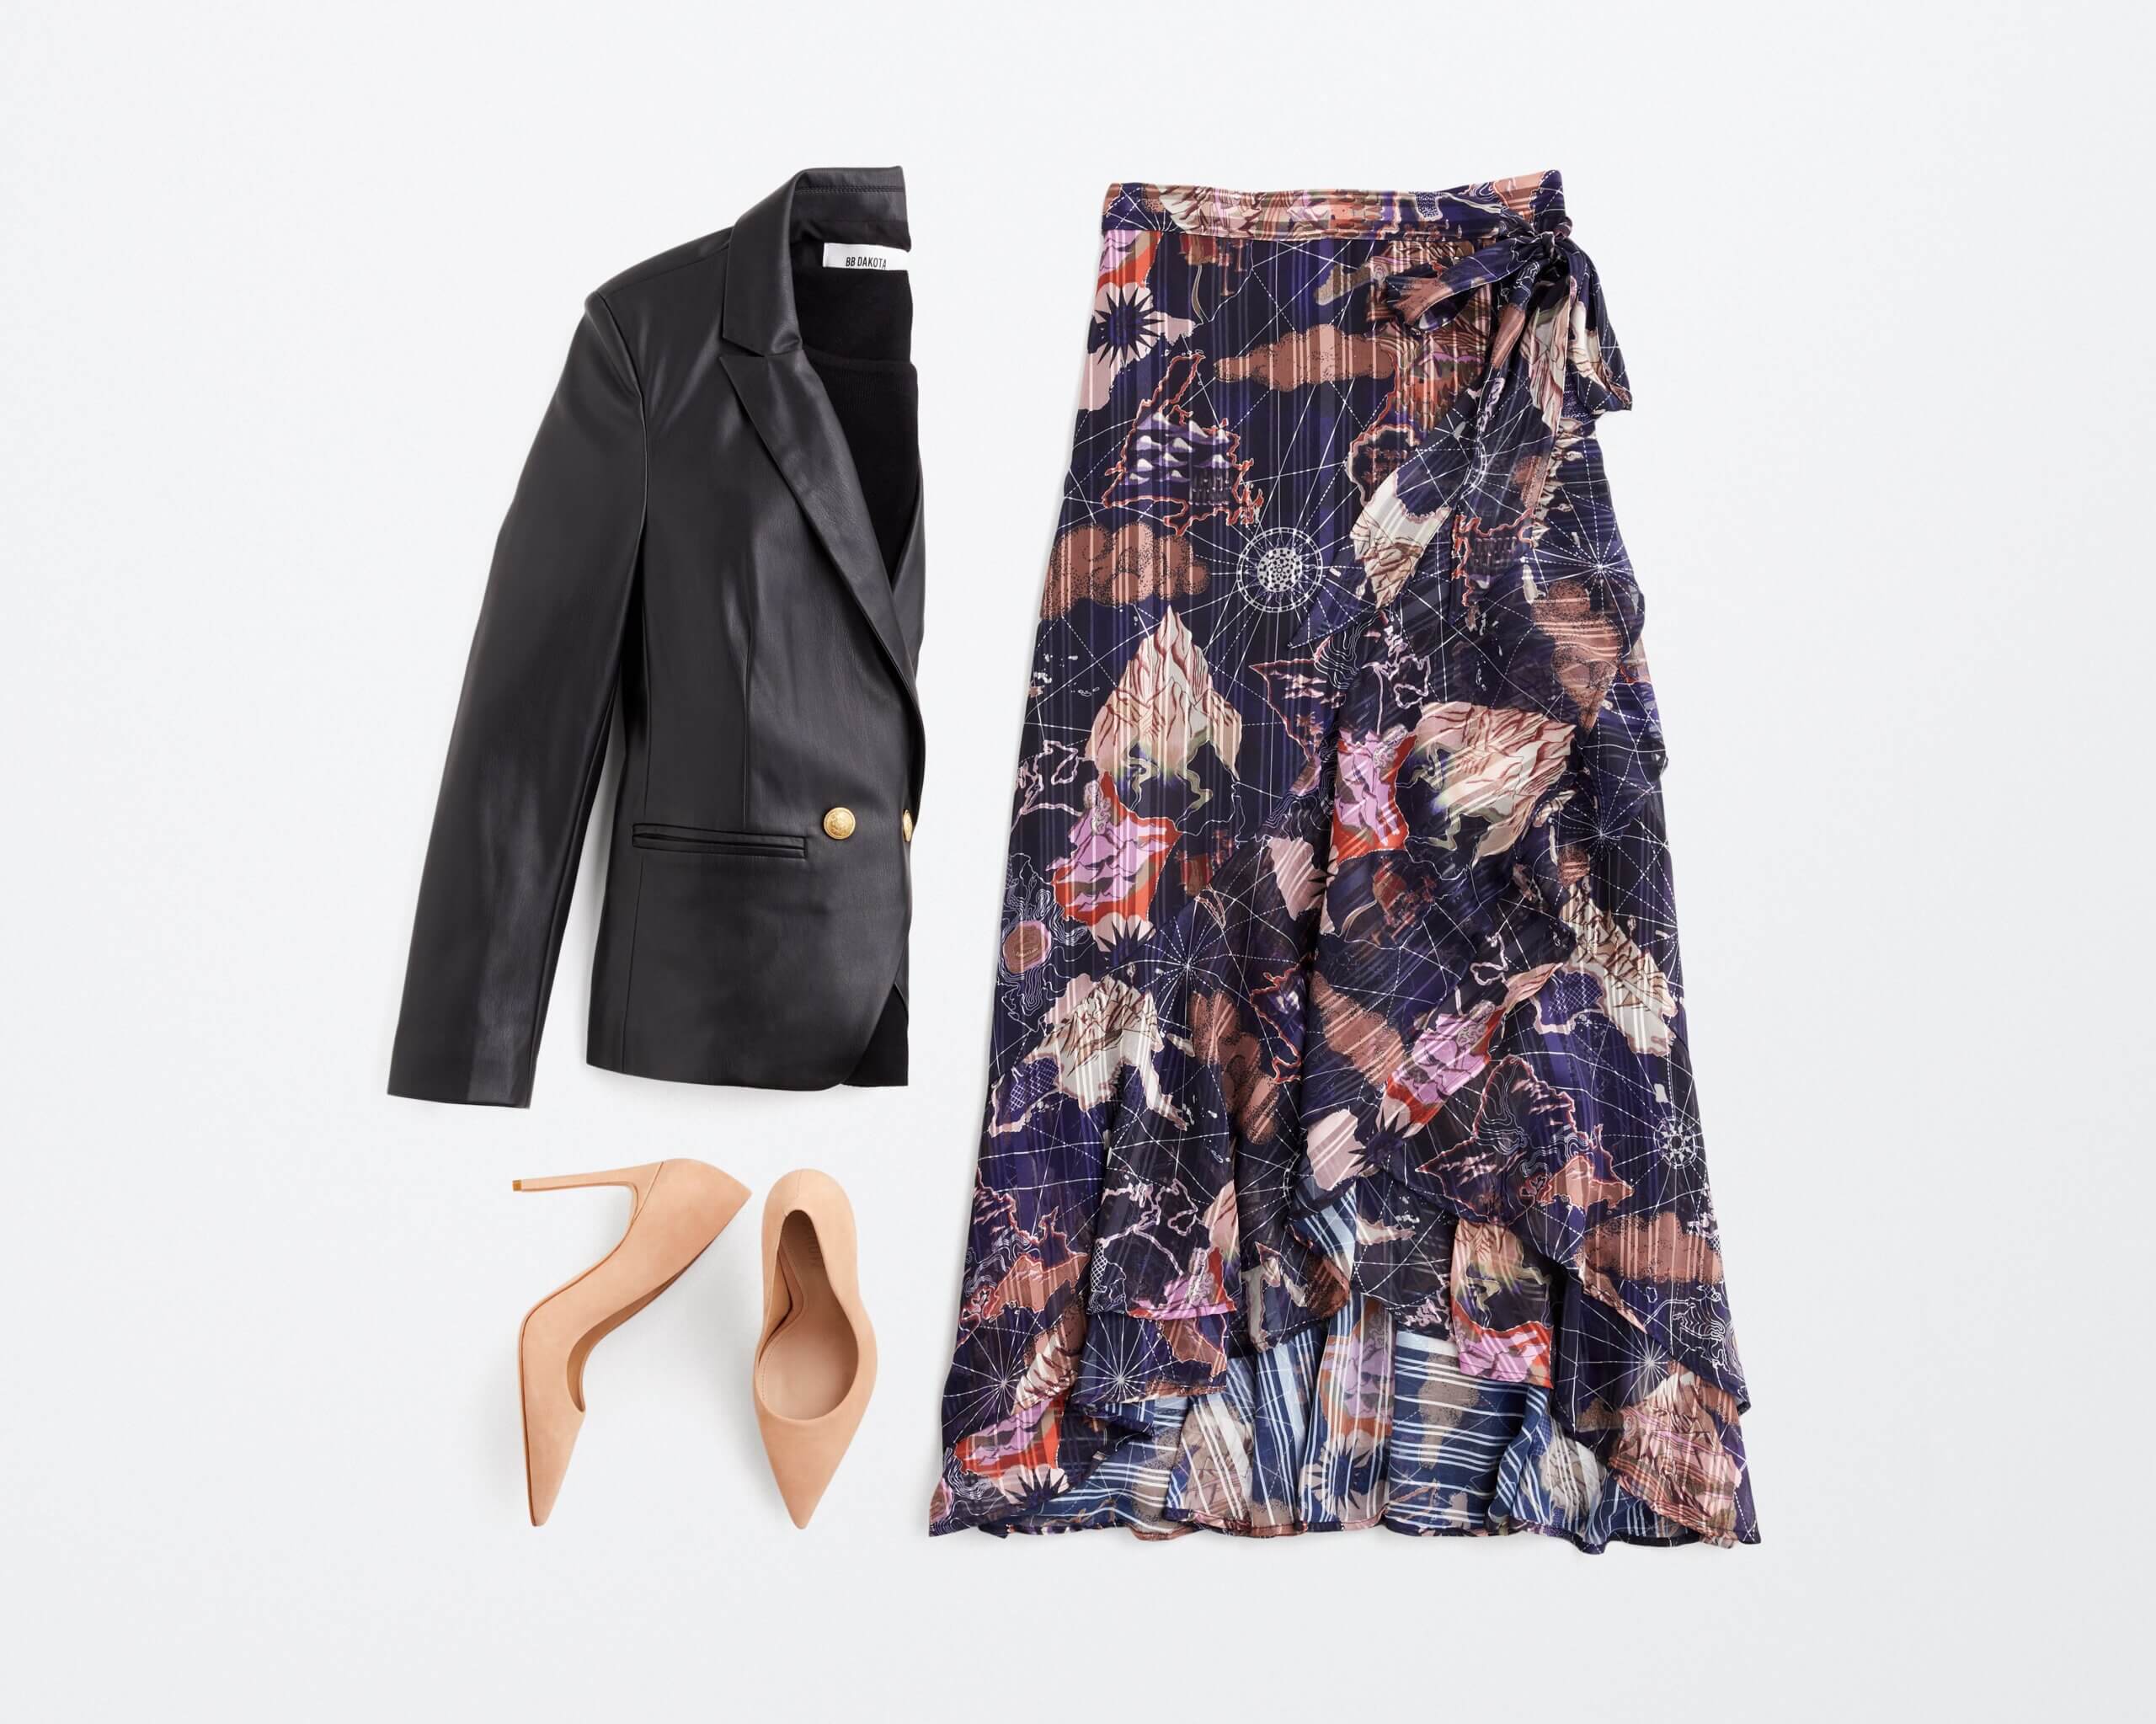 Stitch Fix women's outfit laydown featuring black and purple wrap skirt, black blazer and nude pumps. 